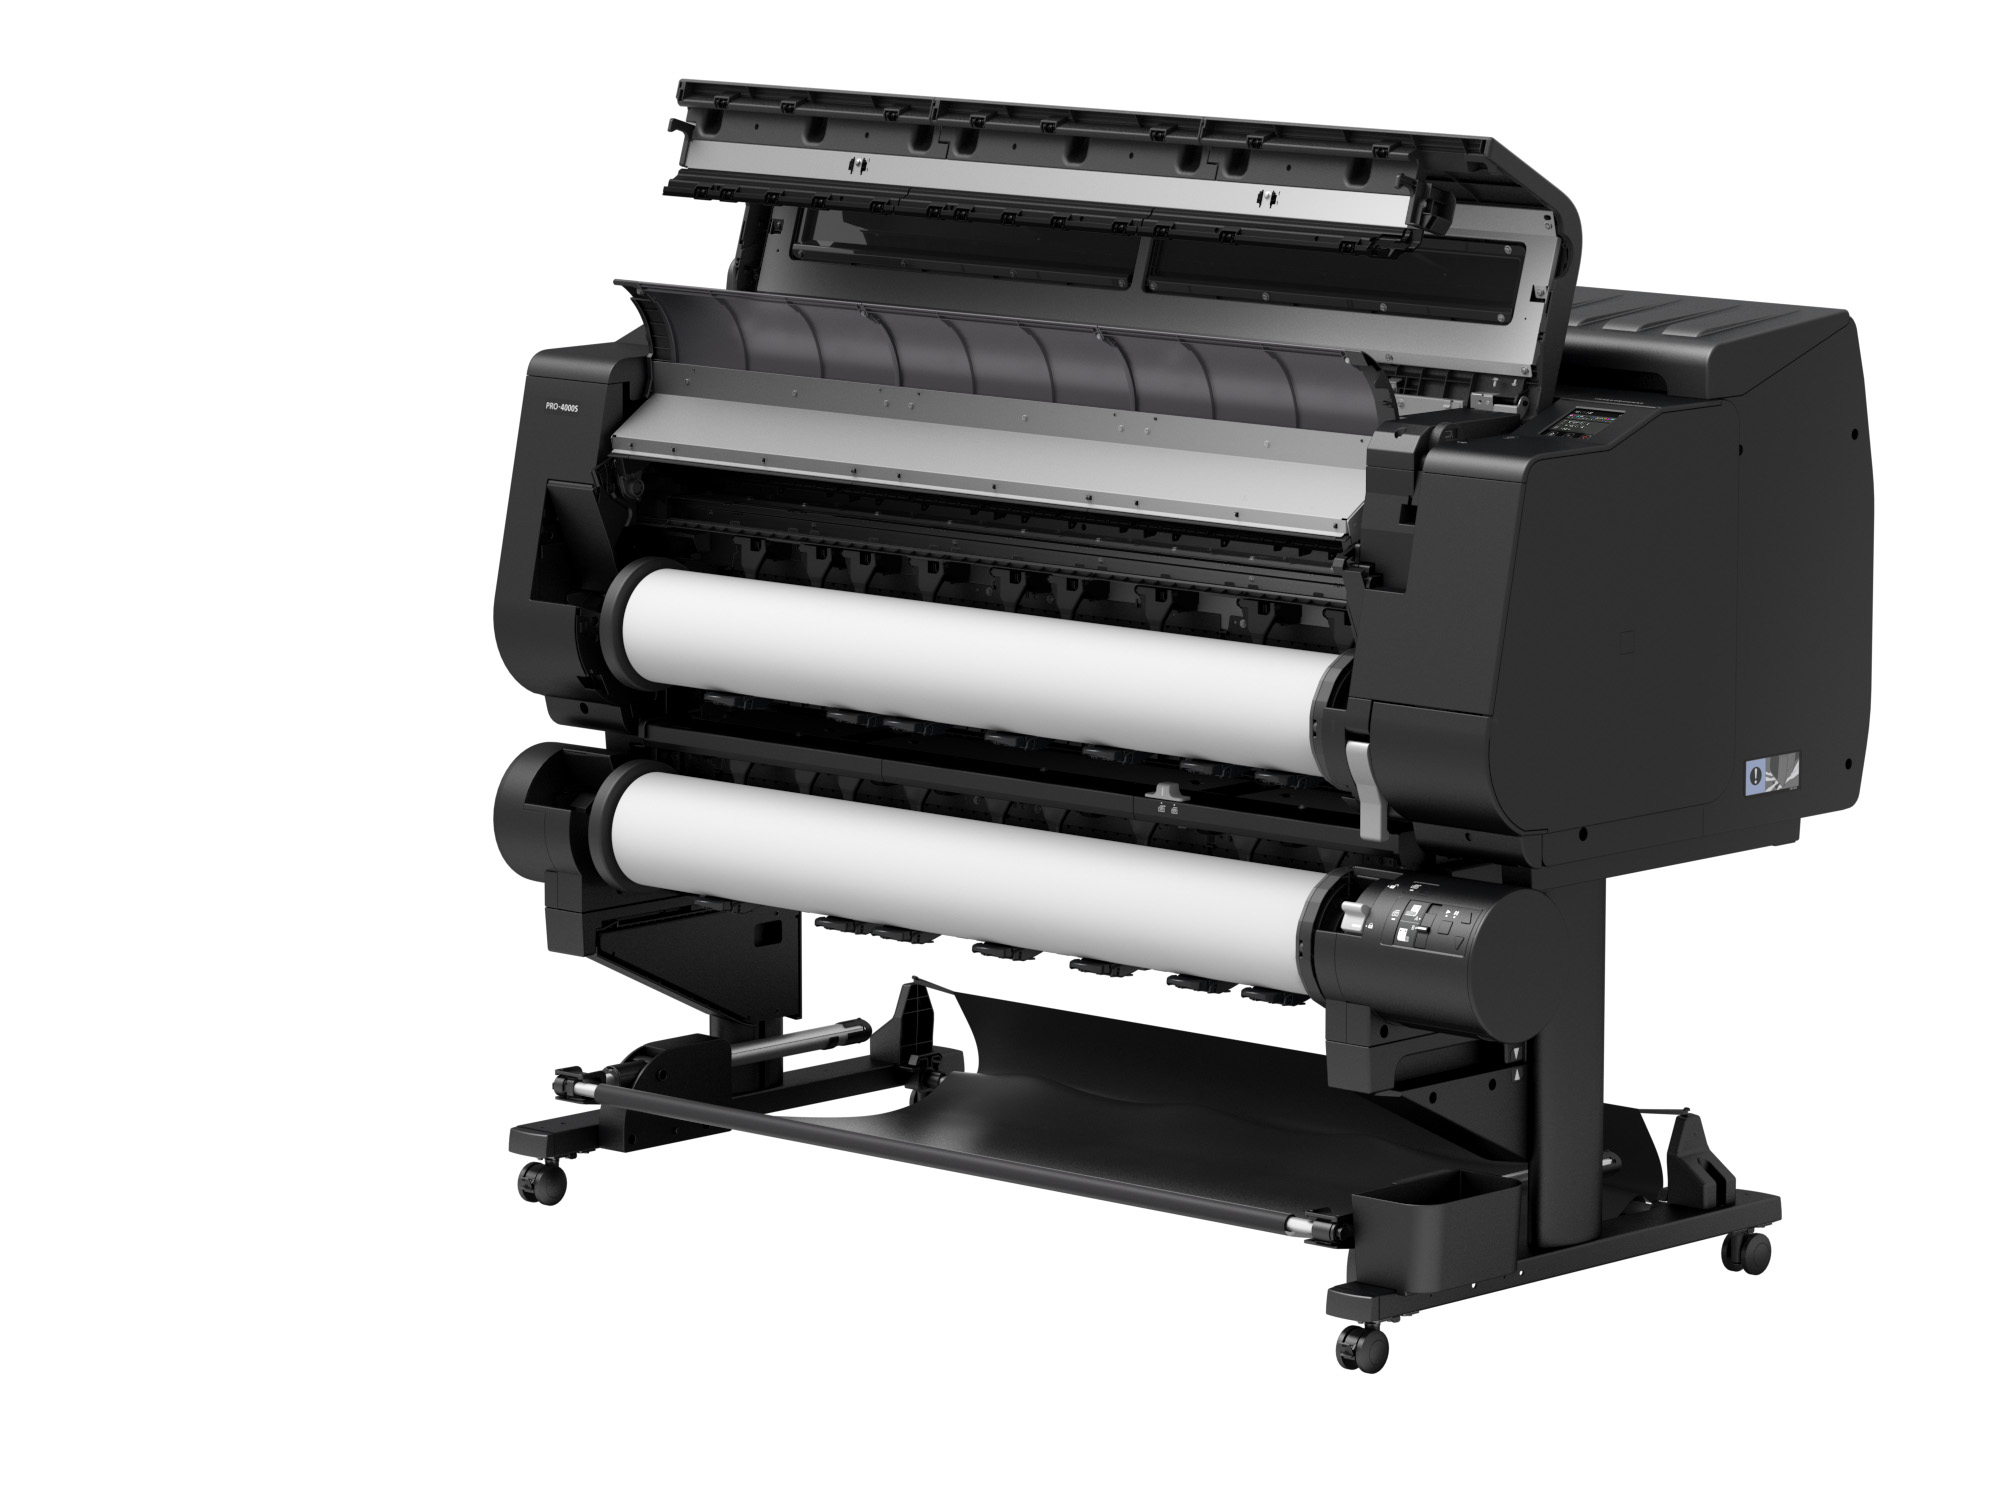 Canon imagePROGRAF PRO-4000S - 44" inch 8 Colour Production Graphics Printer - with optional 2nd Roll Unit